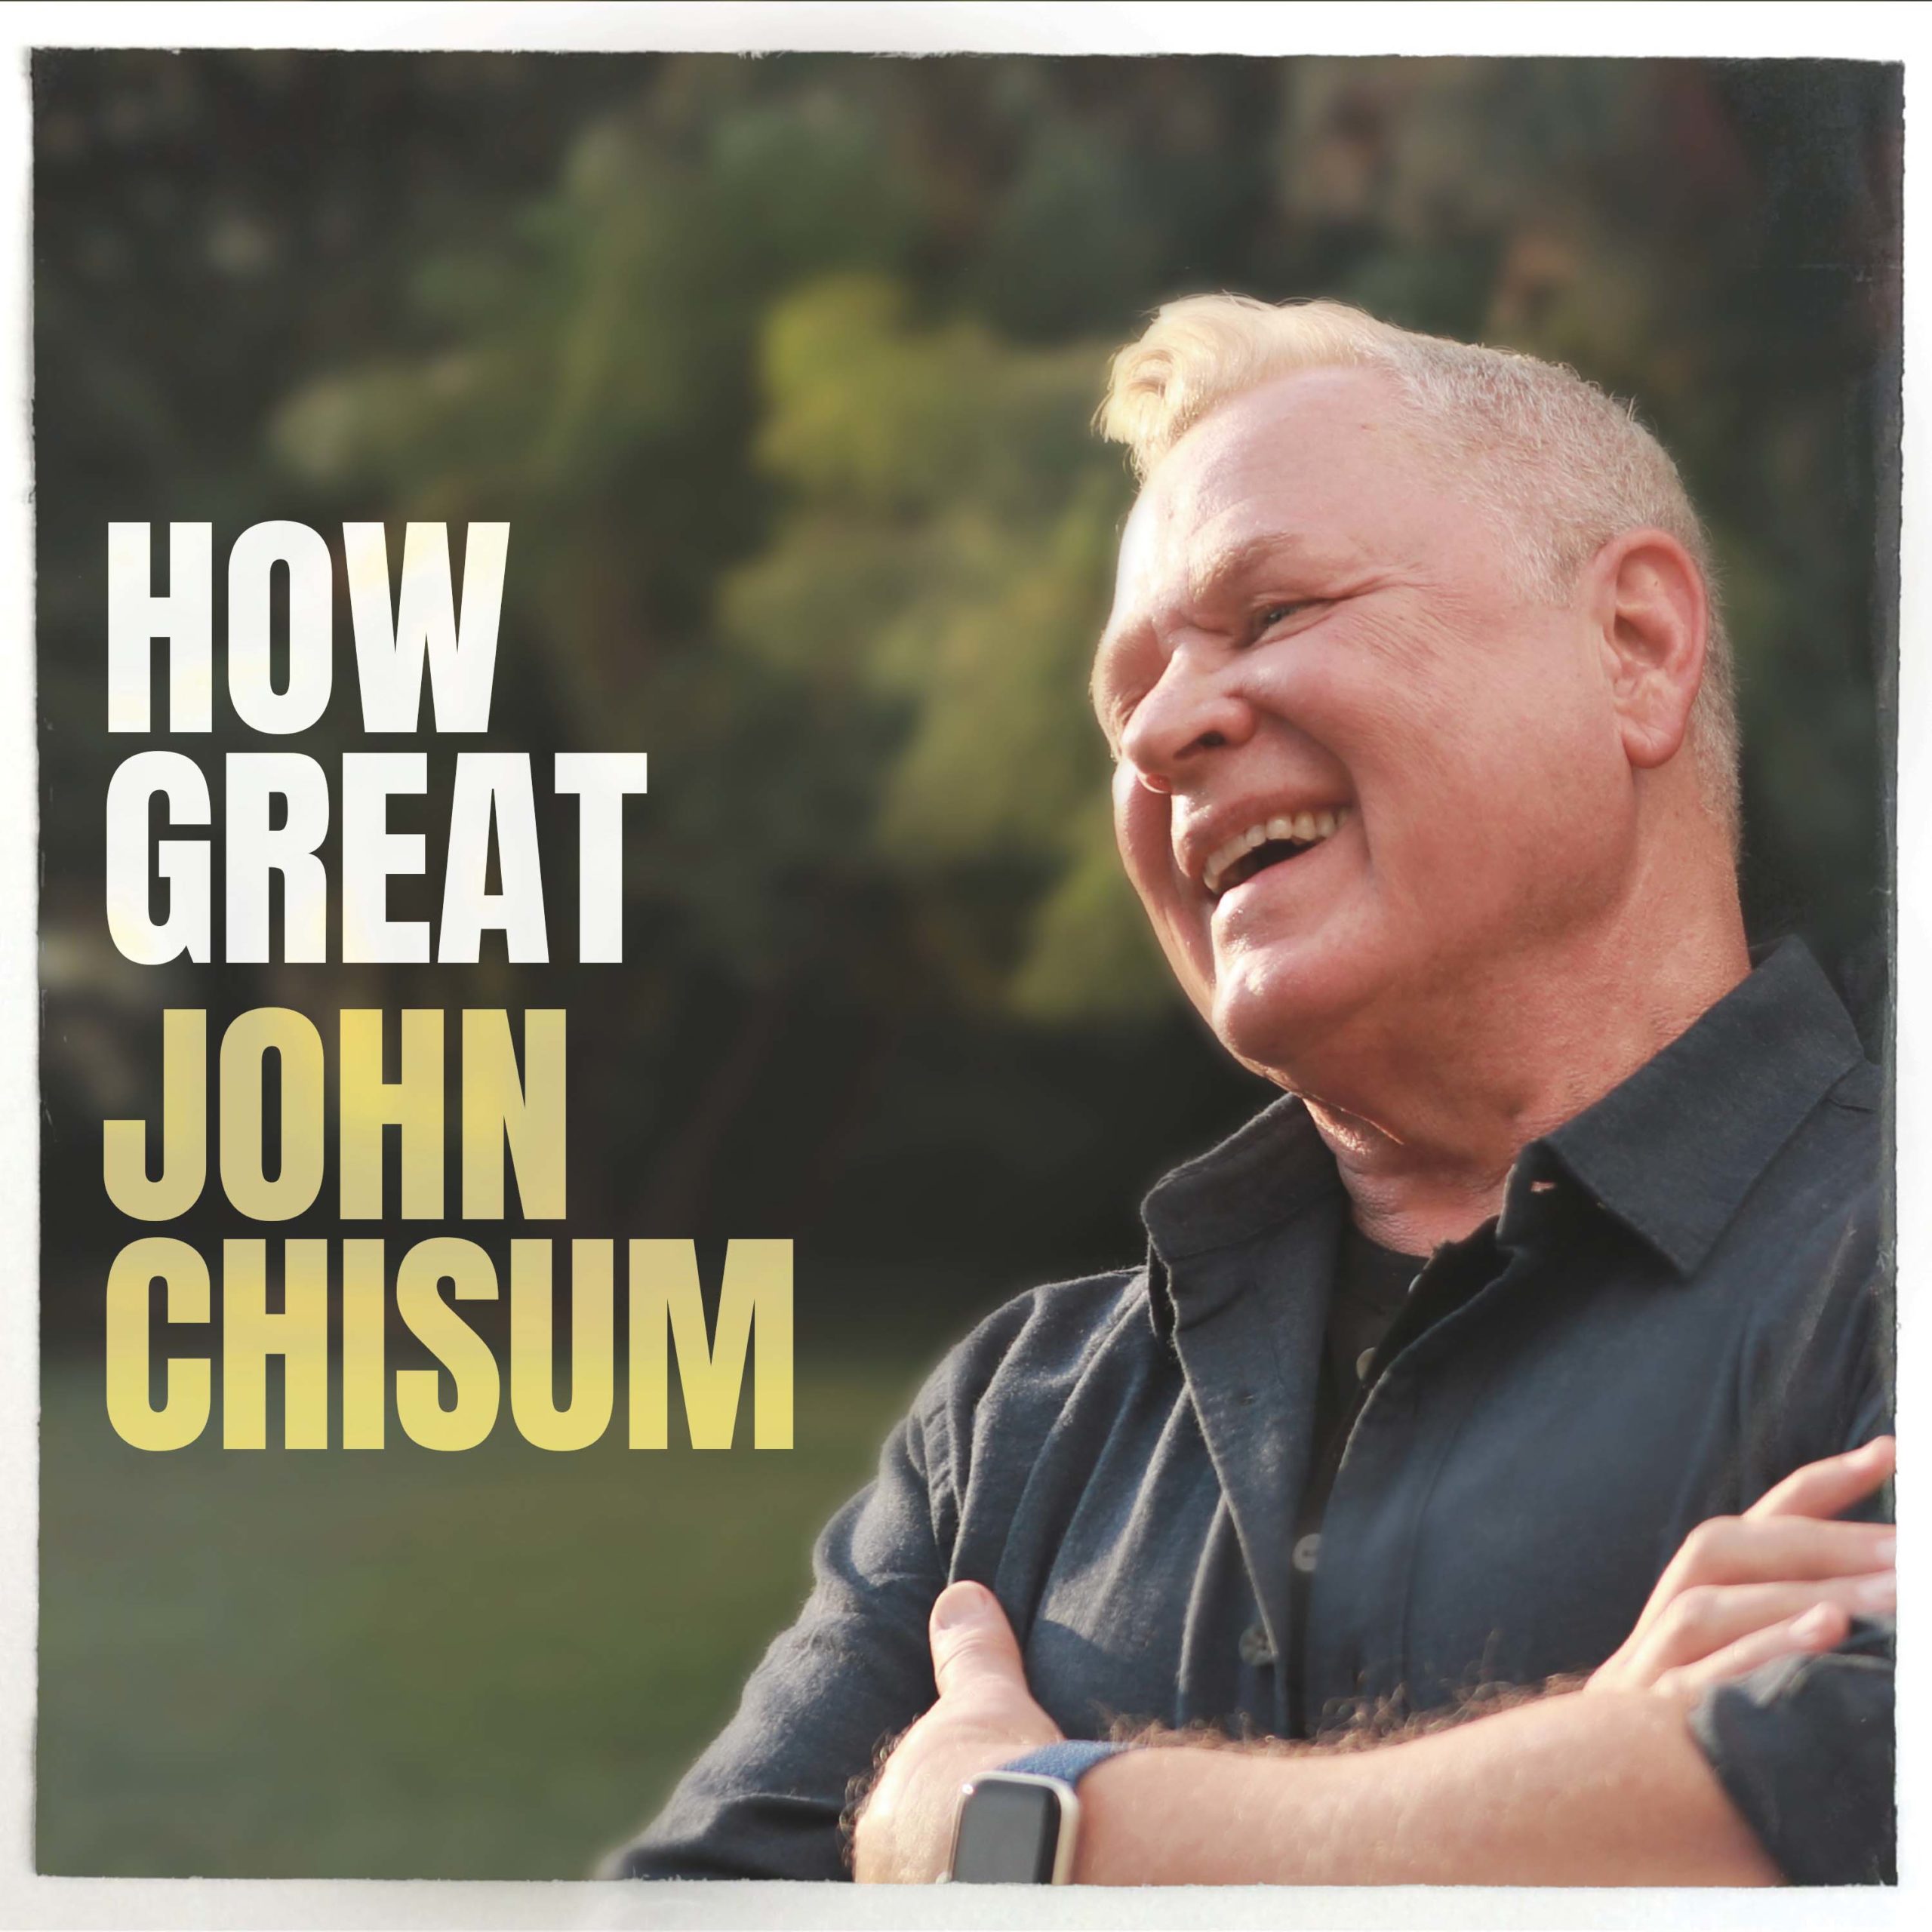 JOHN CHISUM RELEASES ‘HOW GREAT’ TO RADIO TODAY